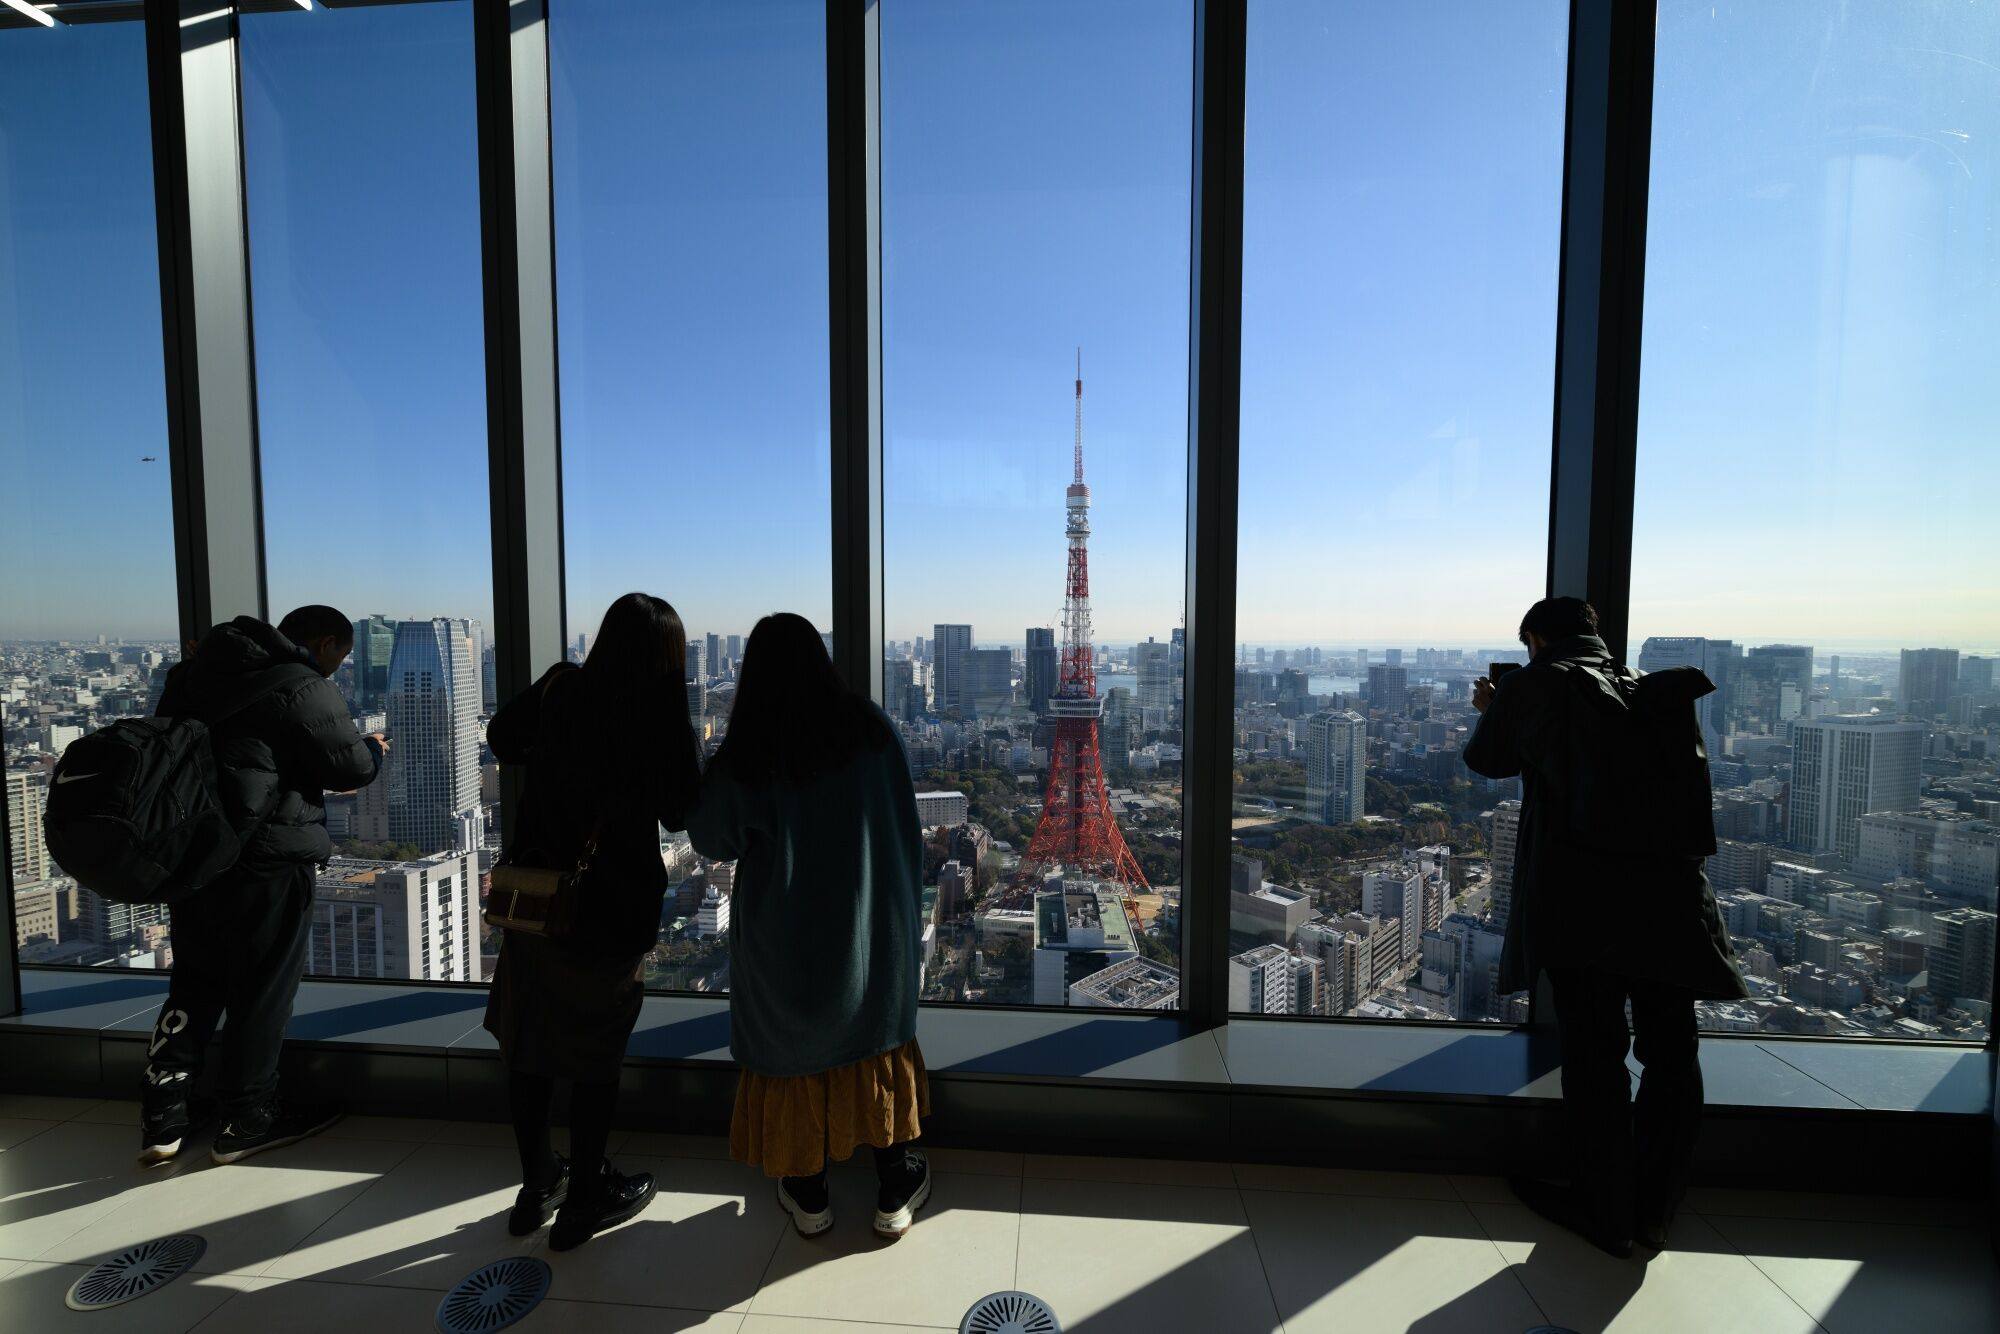 Visitors look out the Tokyo Tower from the observatory at the Azabudai Hills Mori JP Tower in Tokyo. Japan is one of the largest financial contributors to the ICC. Photo: Bloomberg